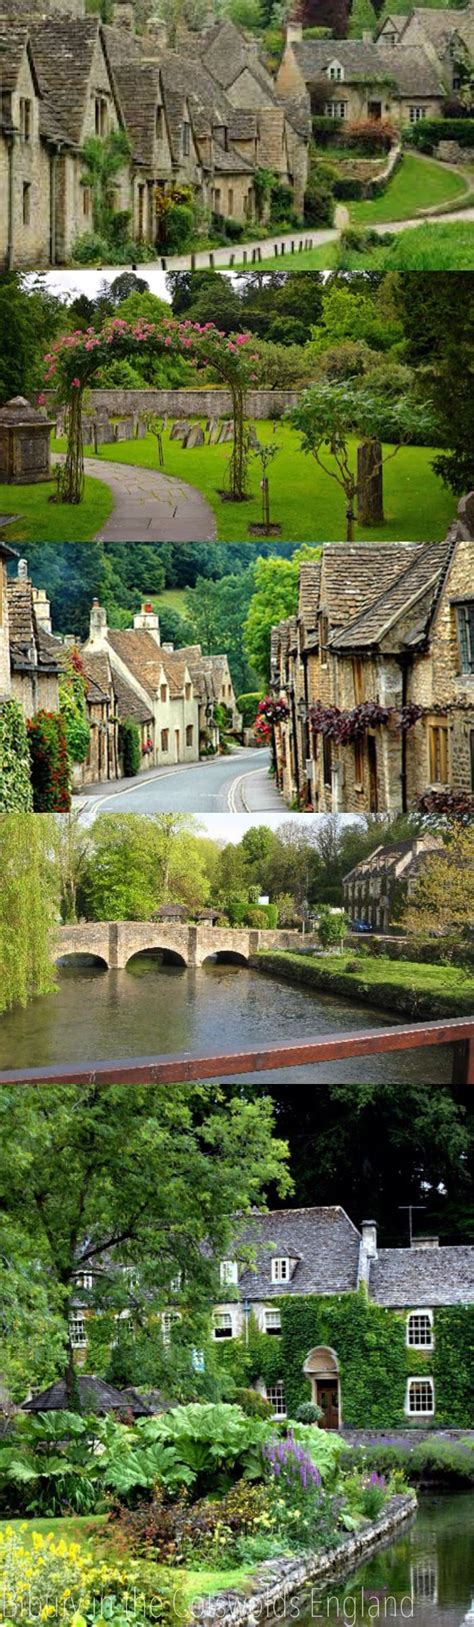 England Bibury In The Cotswolds England Heavenly